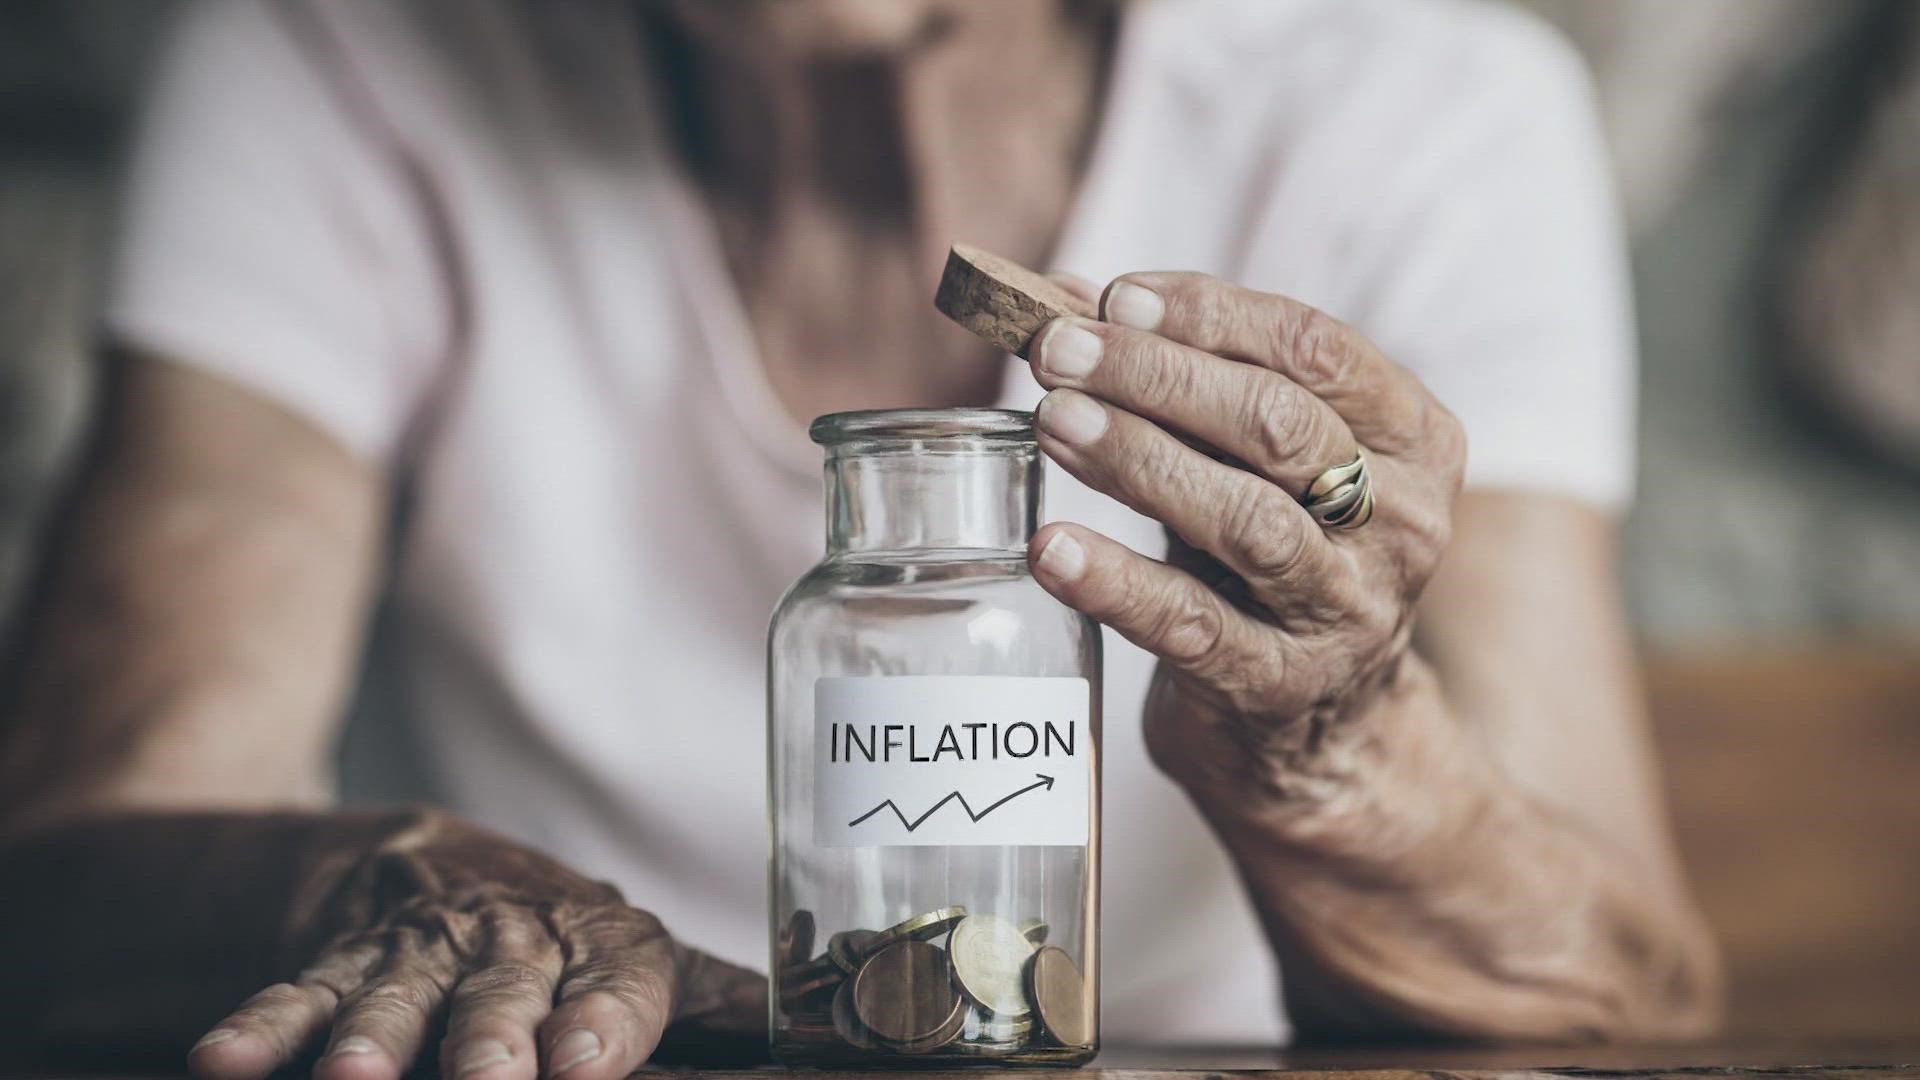 Inflation is tough, but even harder on senior citizens who are on fixed incomes.